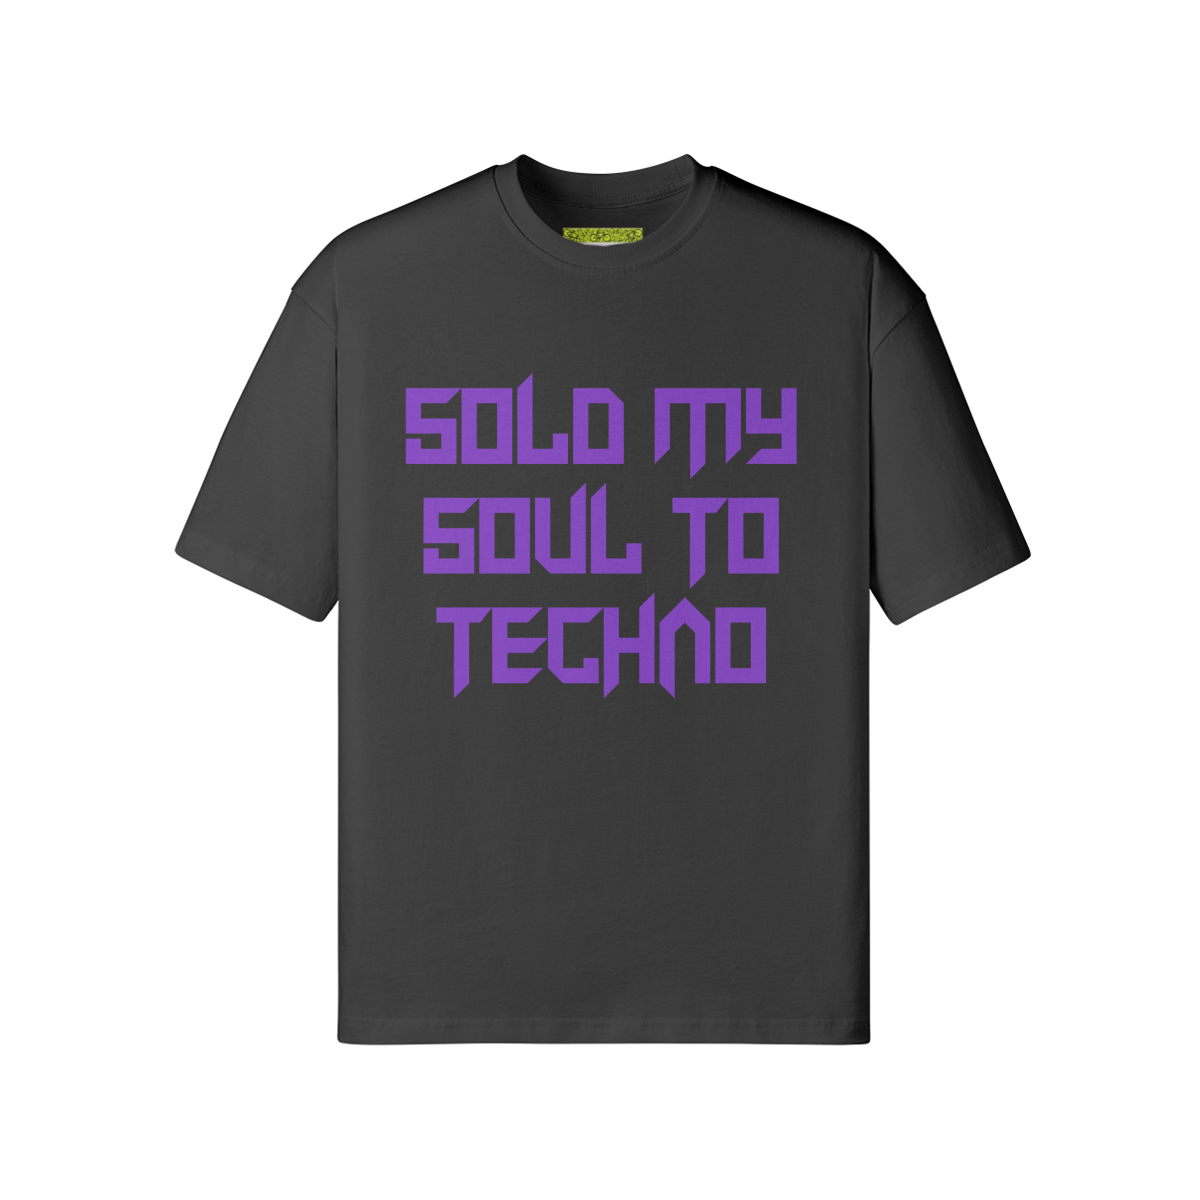 SOLD MY SOUL TO TECHNO - Unisex Loose T-shirt